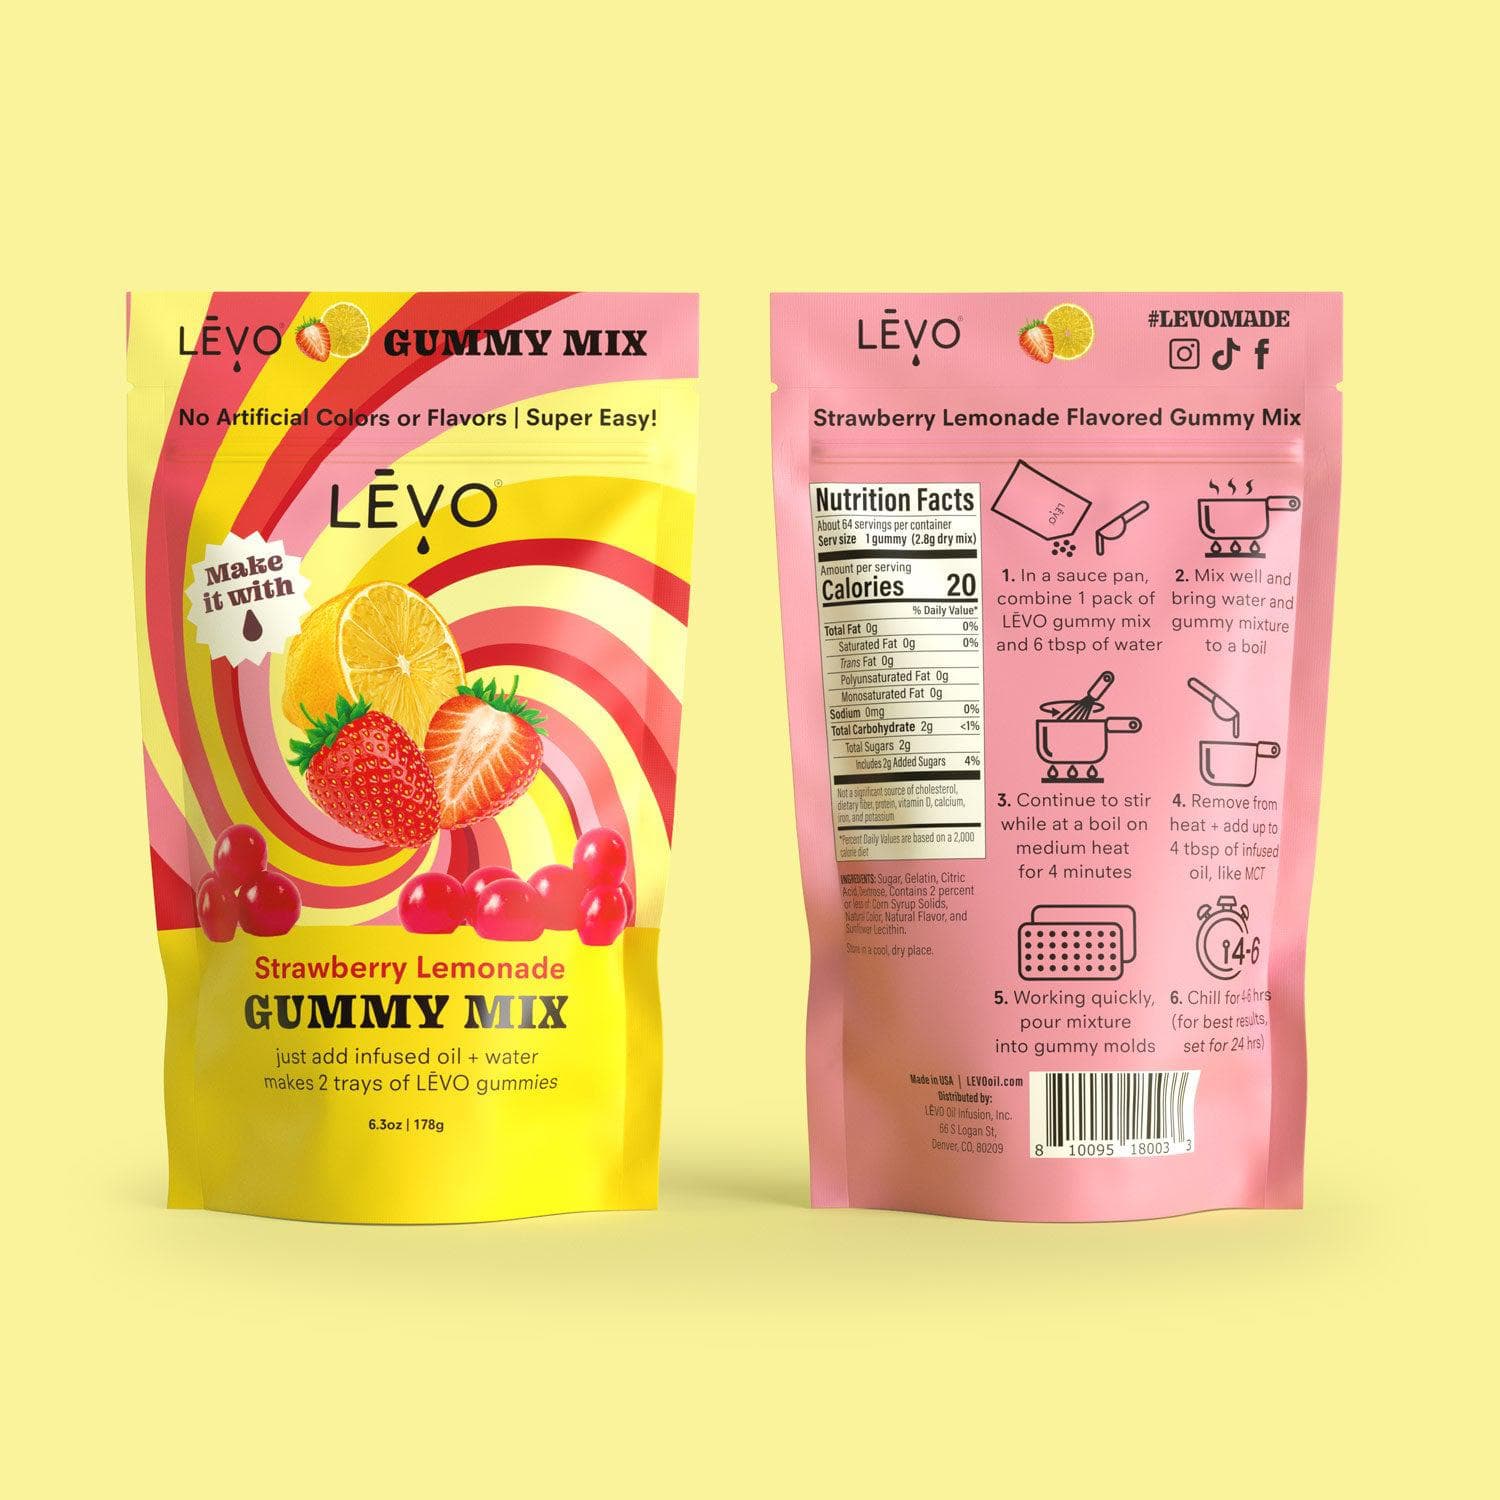 LEVO makes it easy to have your own infused treats for yourself and to share with friends. Each bag of LEVO gummy powder mix fills 2 trays, that's 64 gummies!